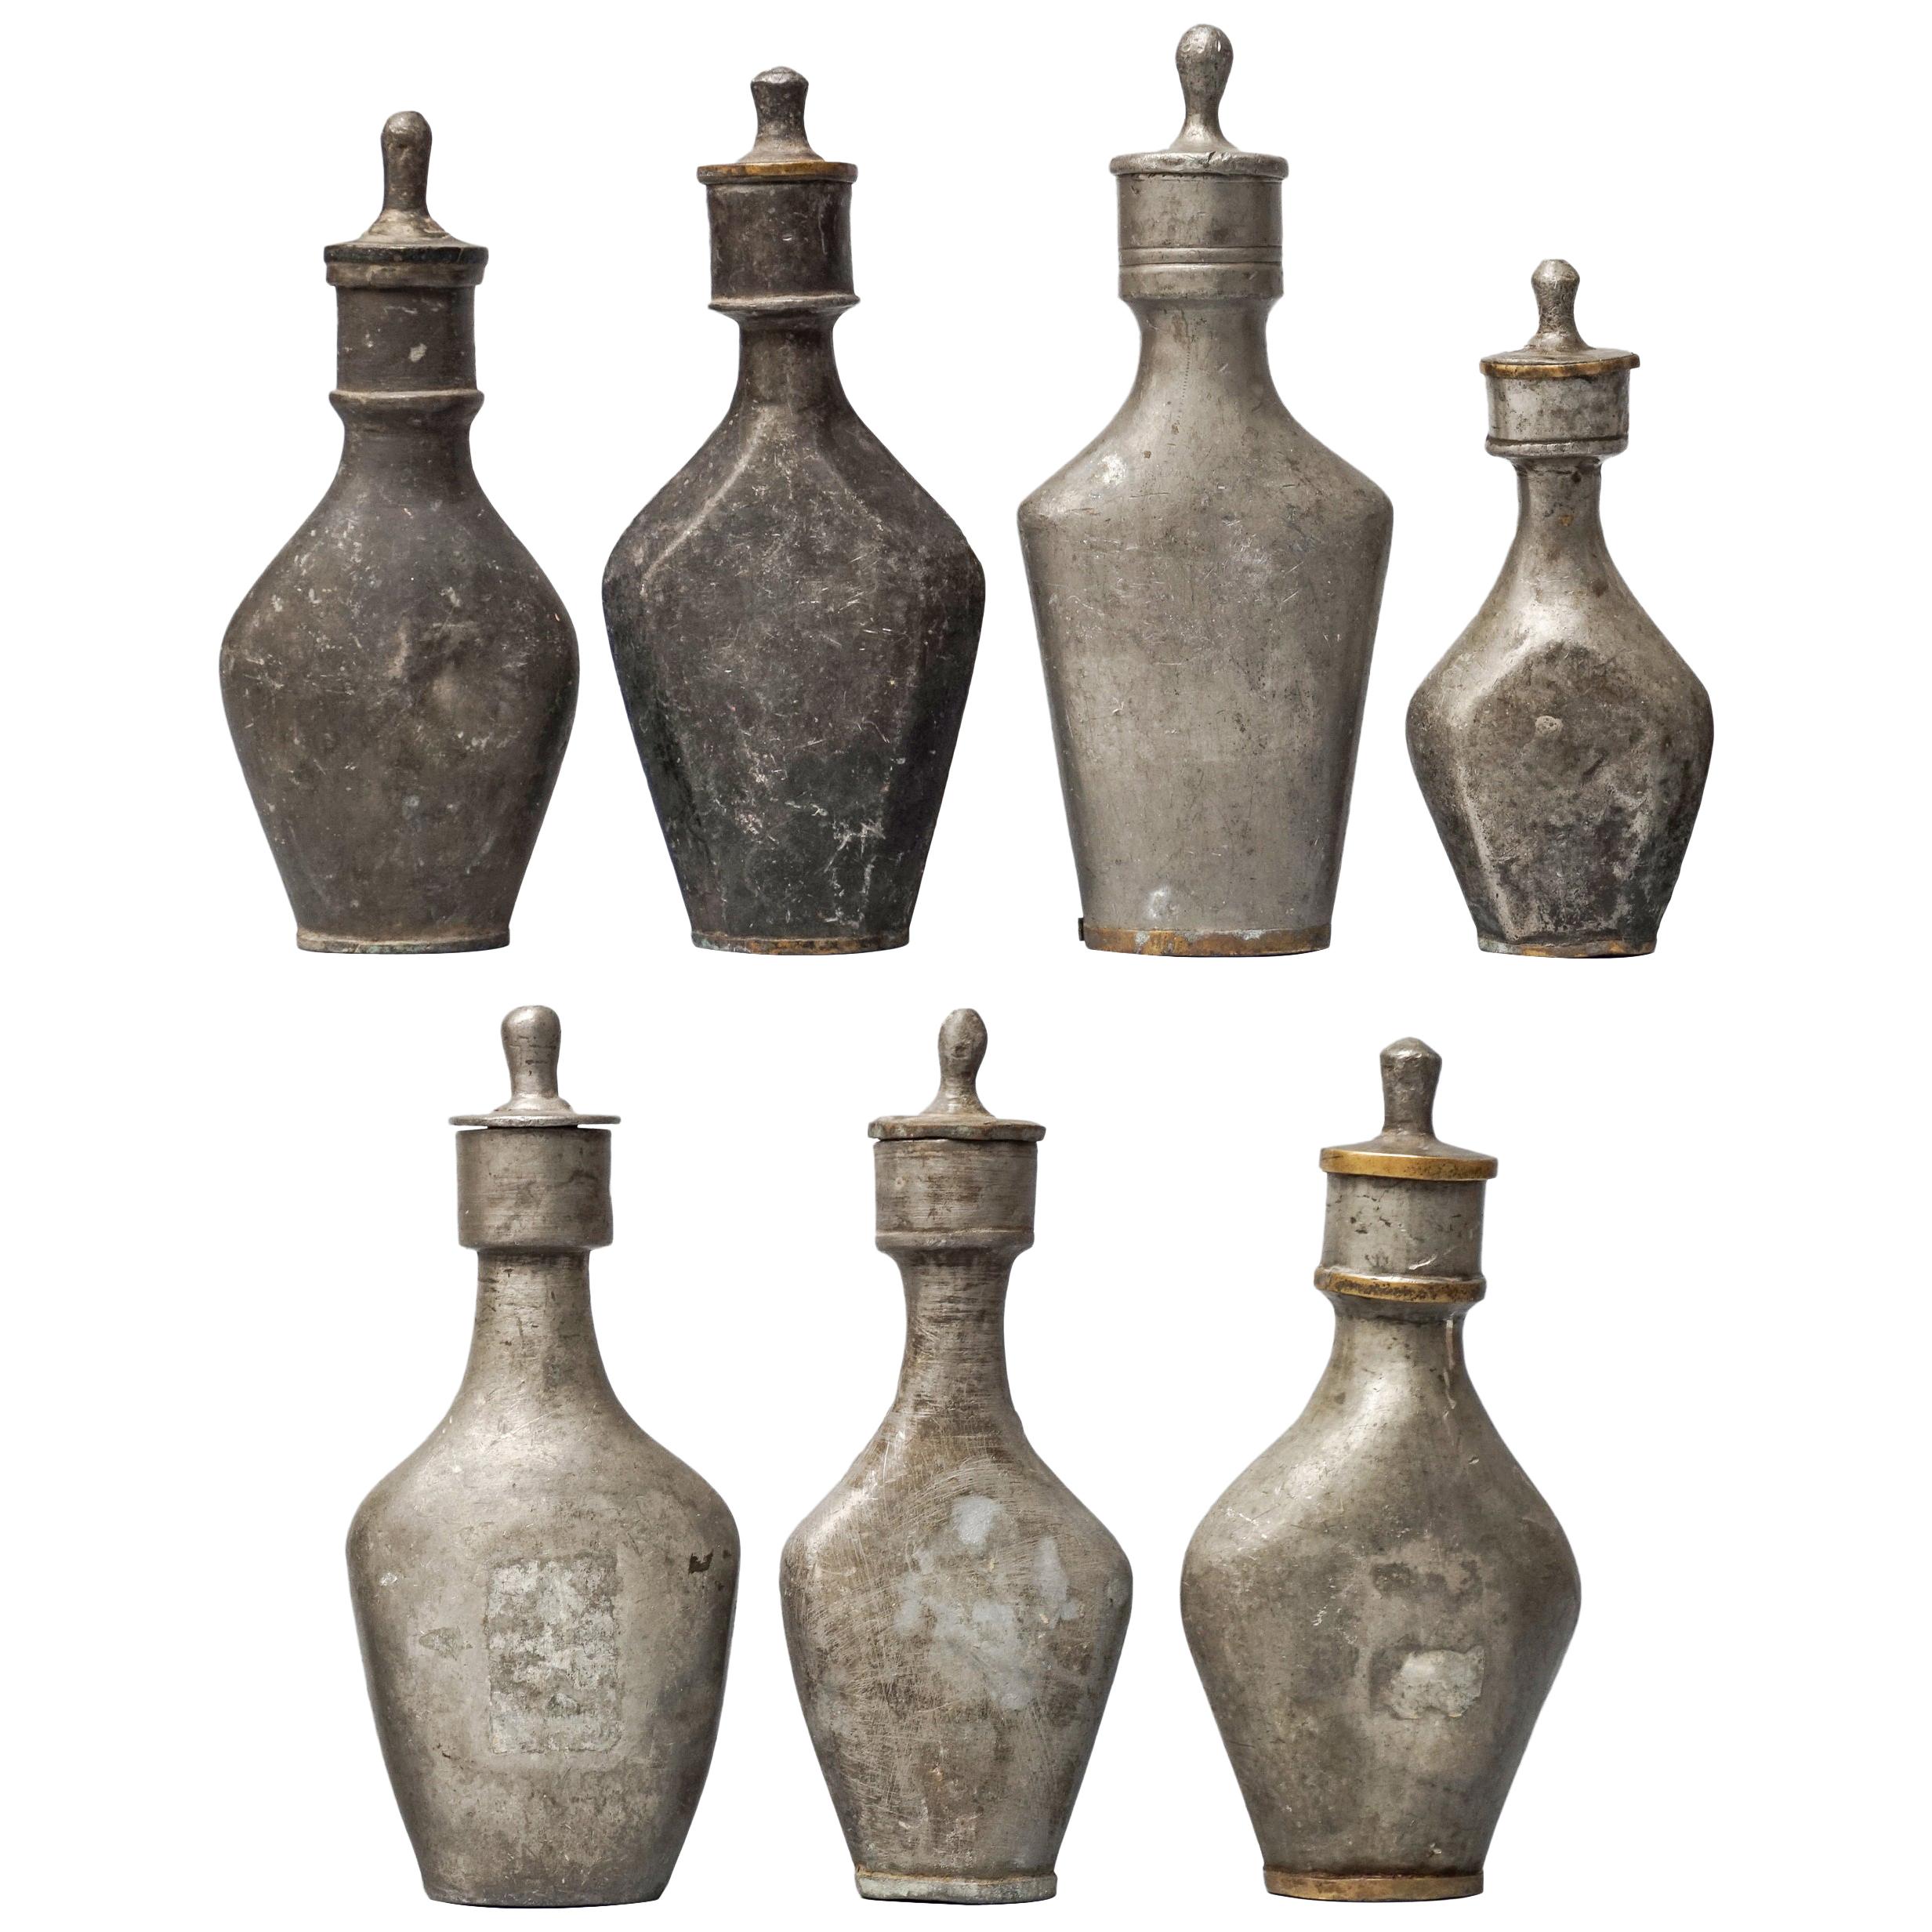 Collection of Seven Rare 18th Century Pewter Baby Nursing Bottles